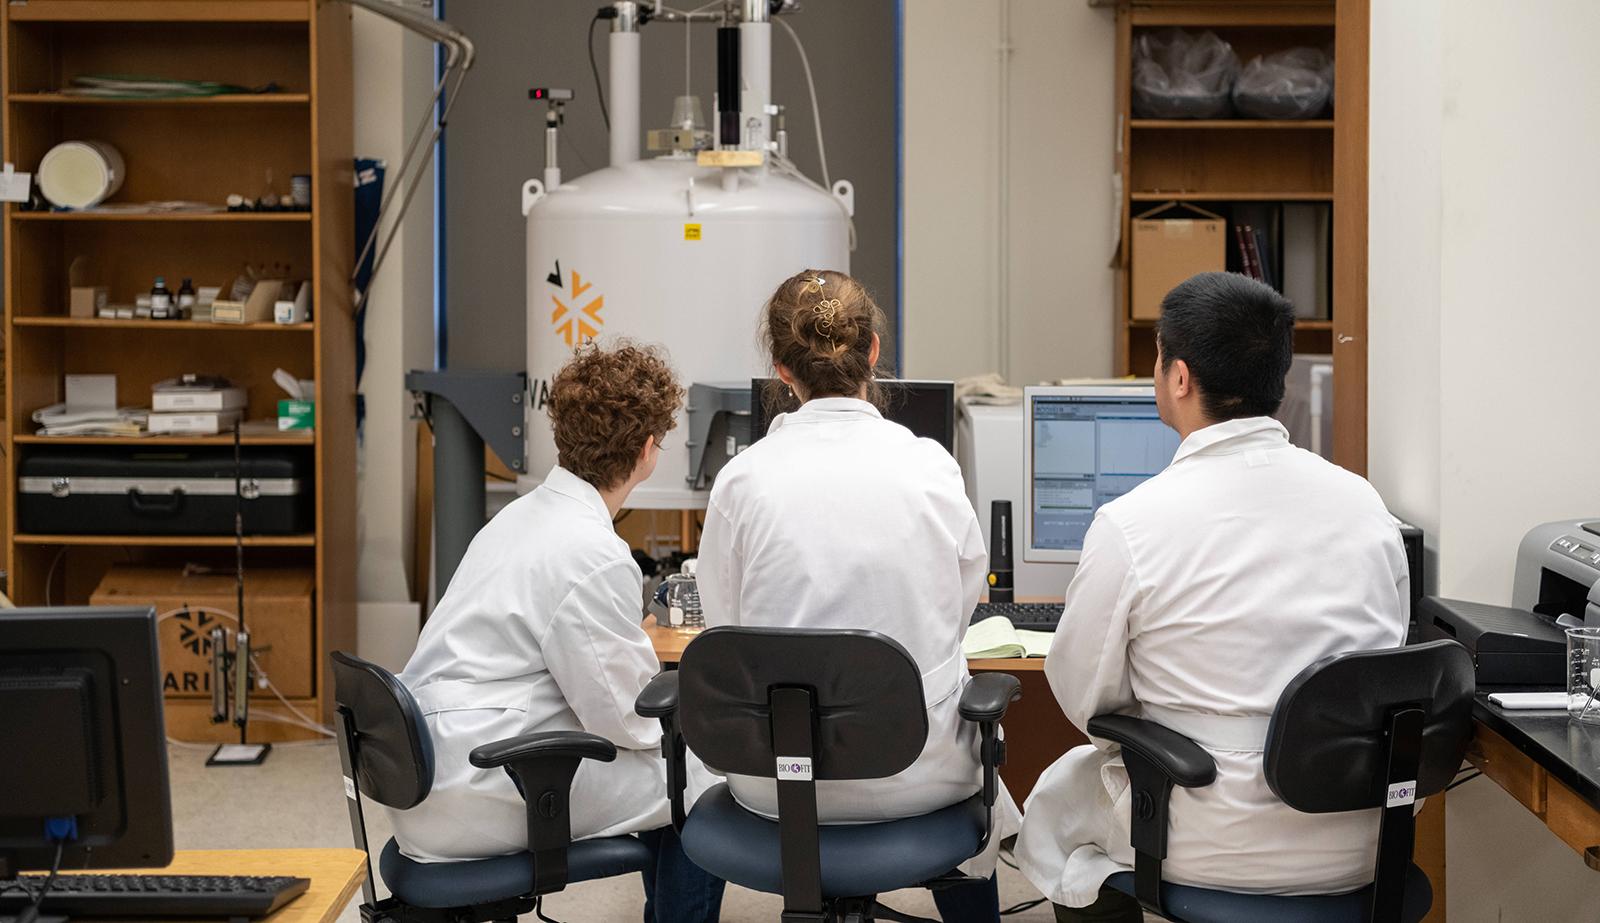 Three people in white lab coats sit in chairs facing away from the camera